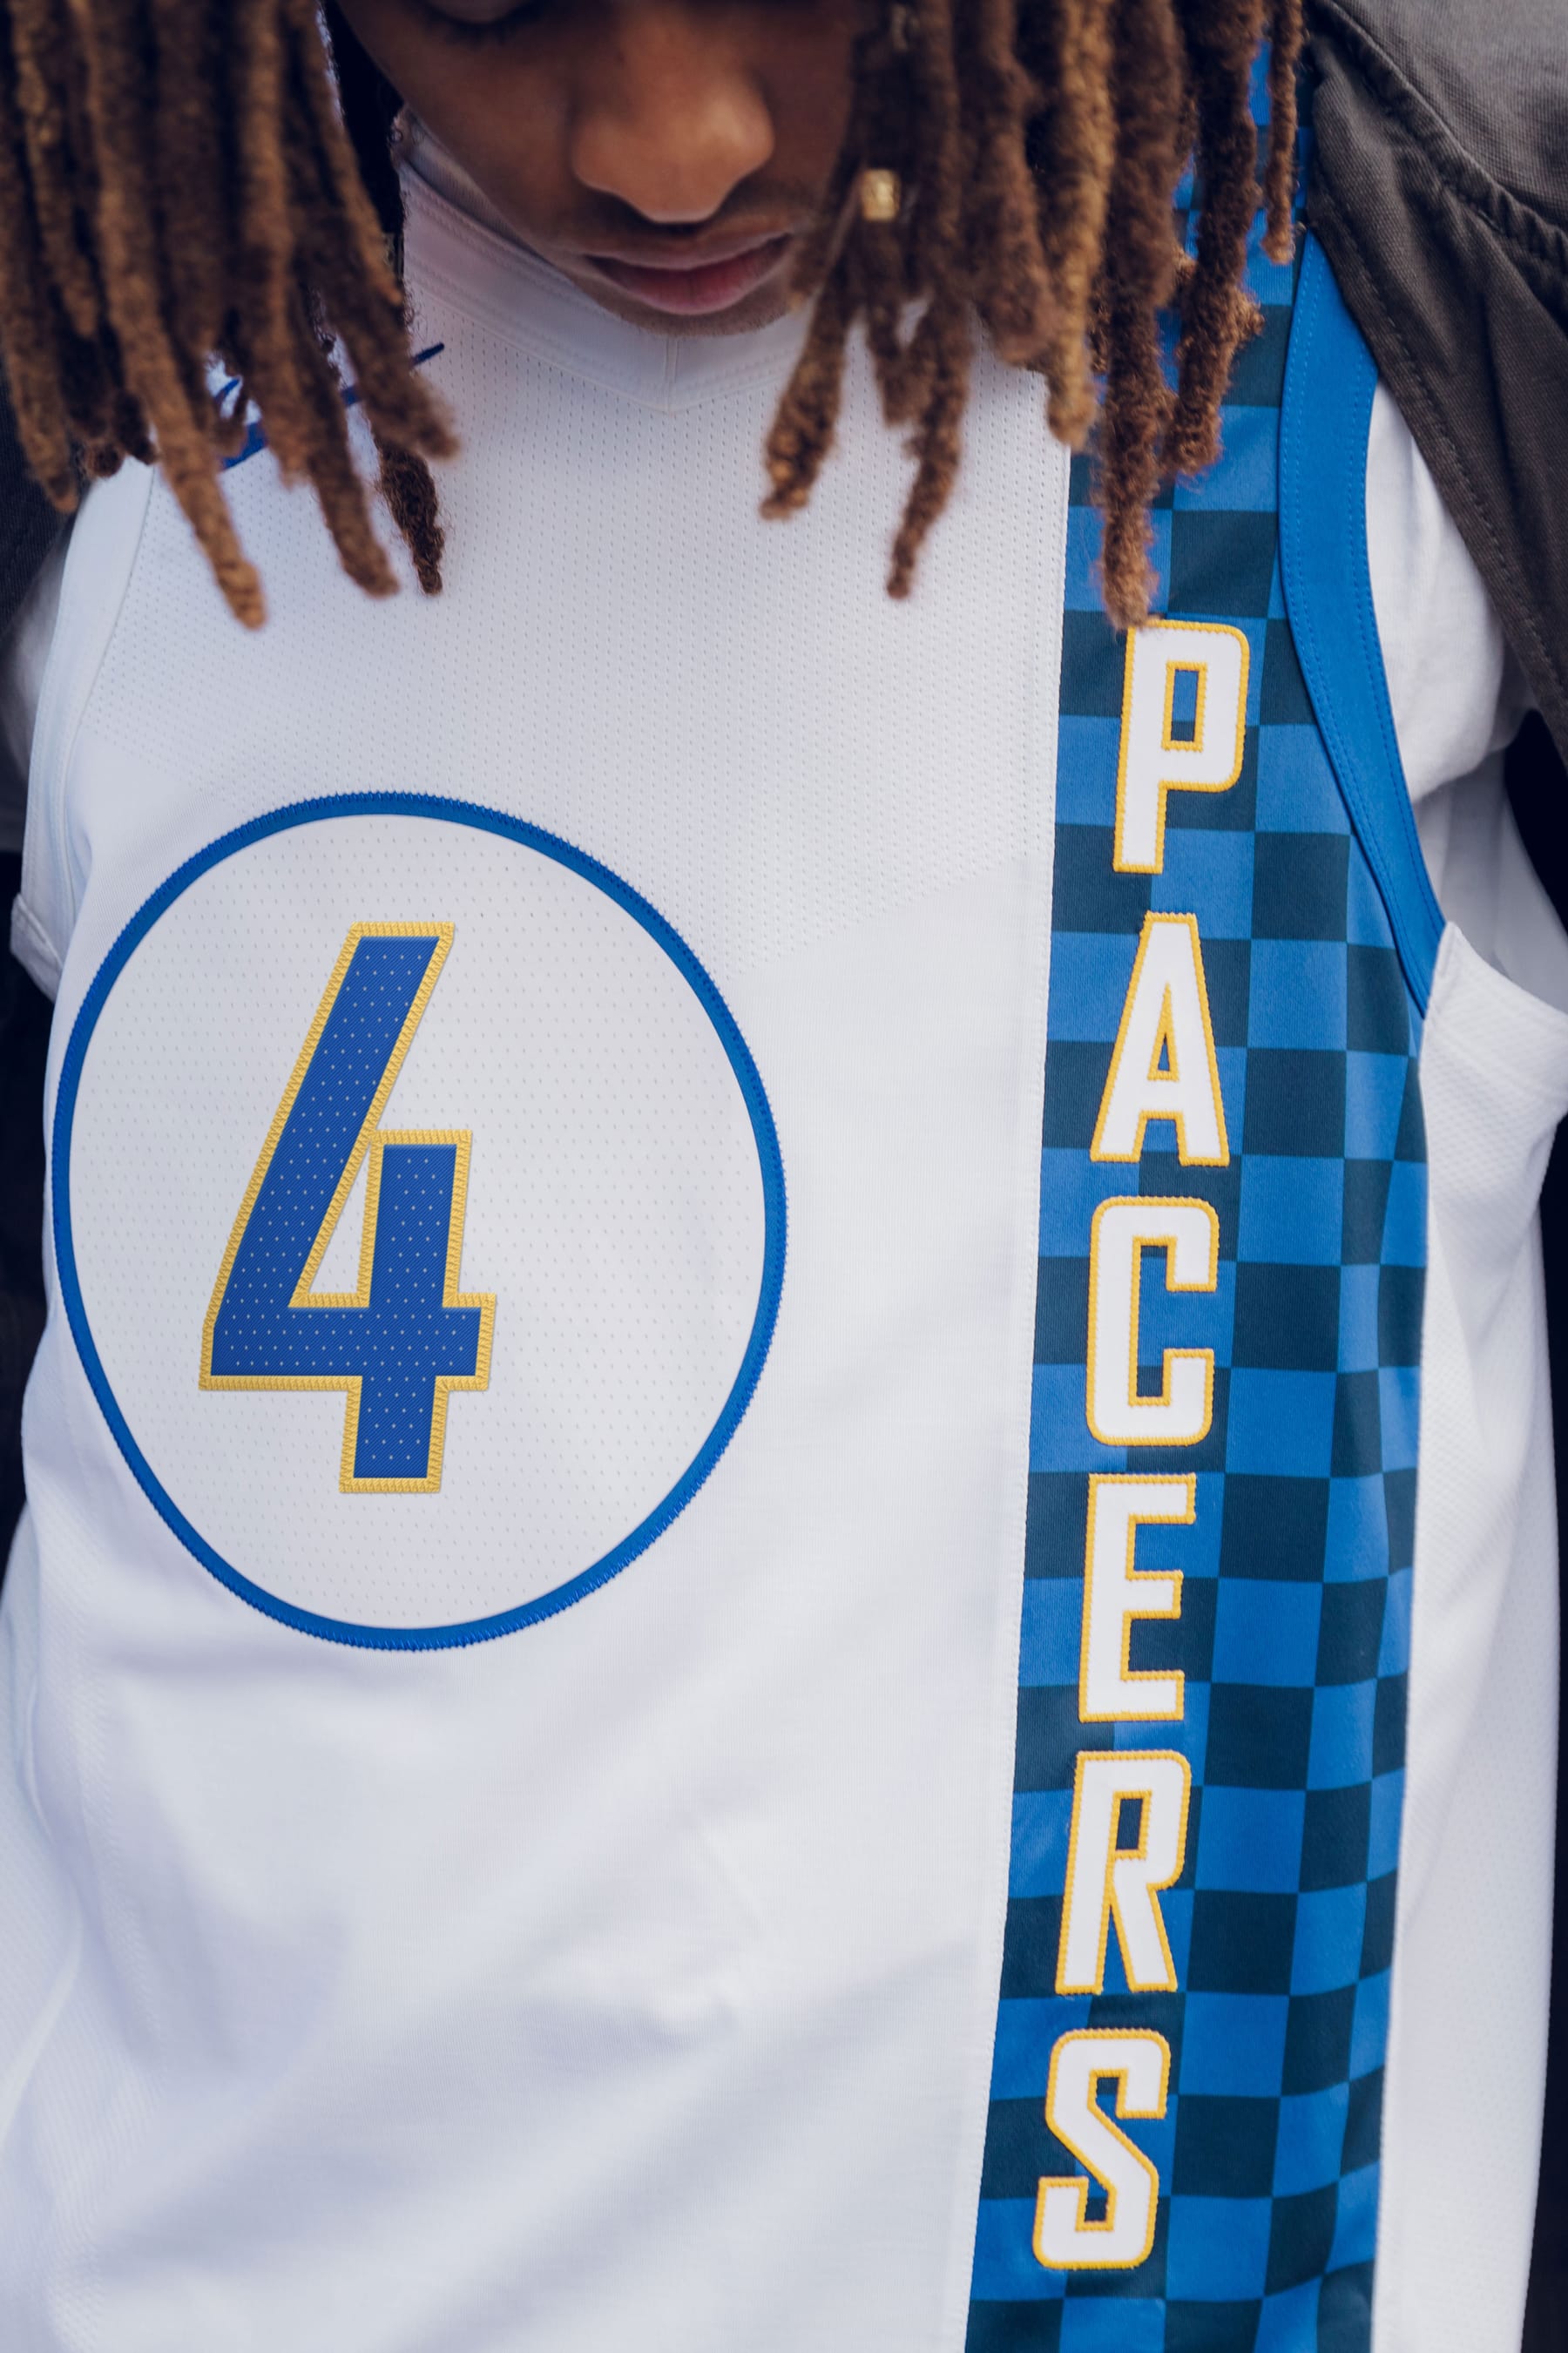 pacers city jersey 2019